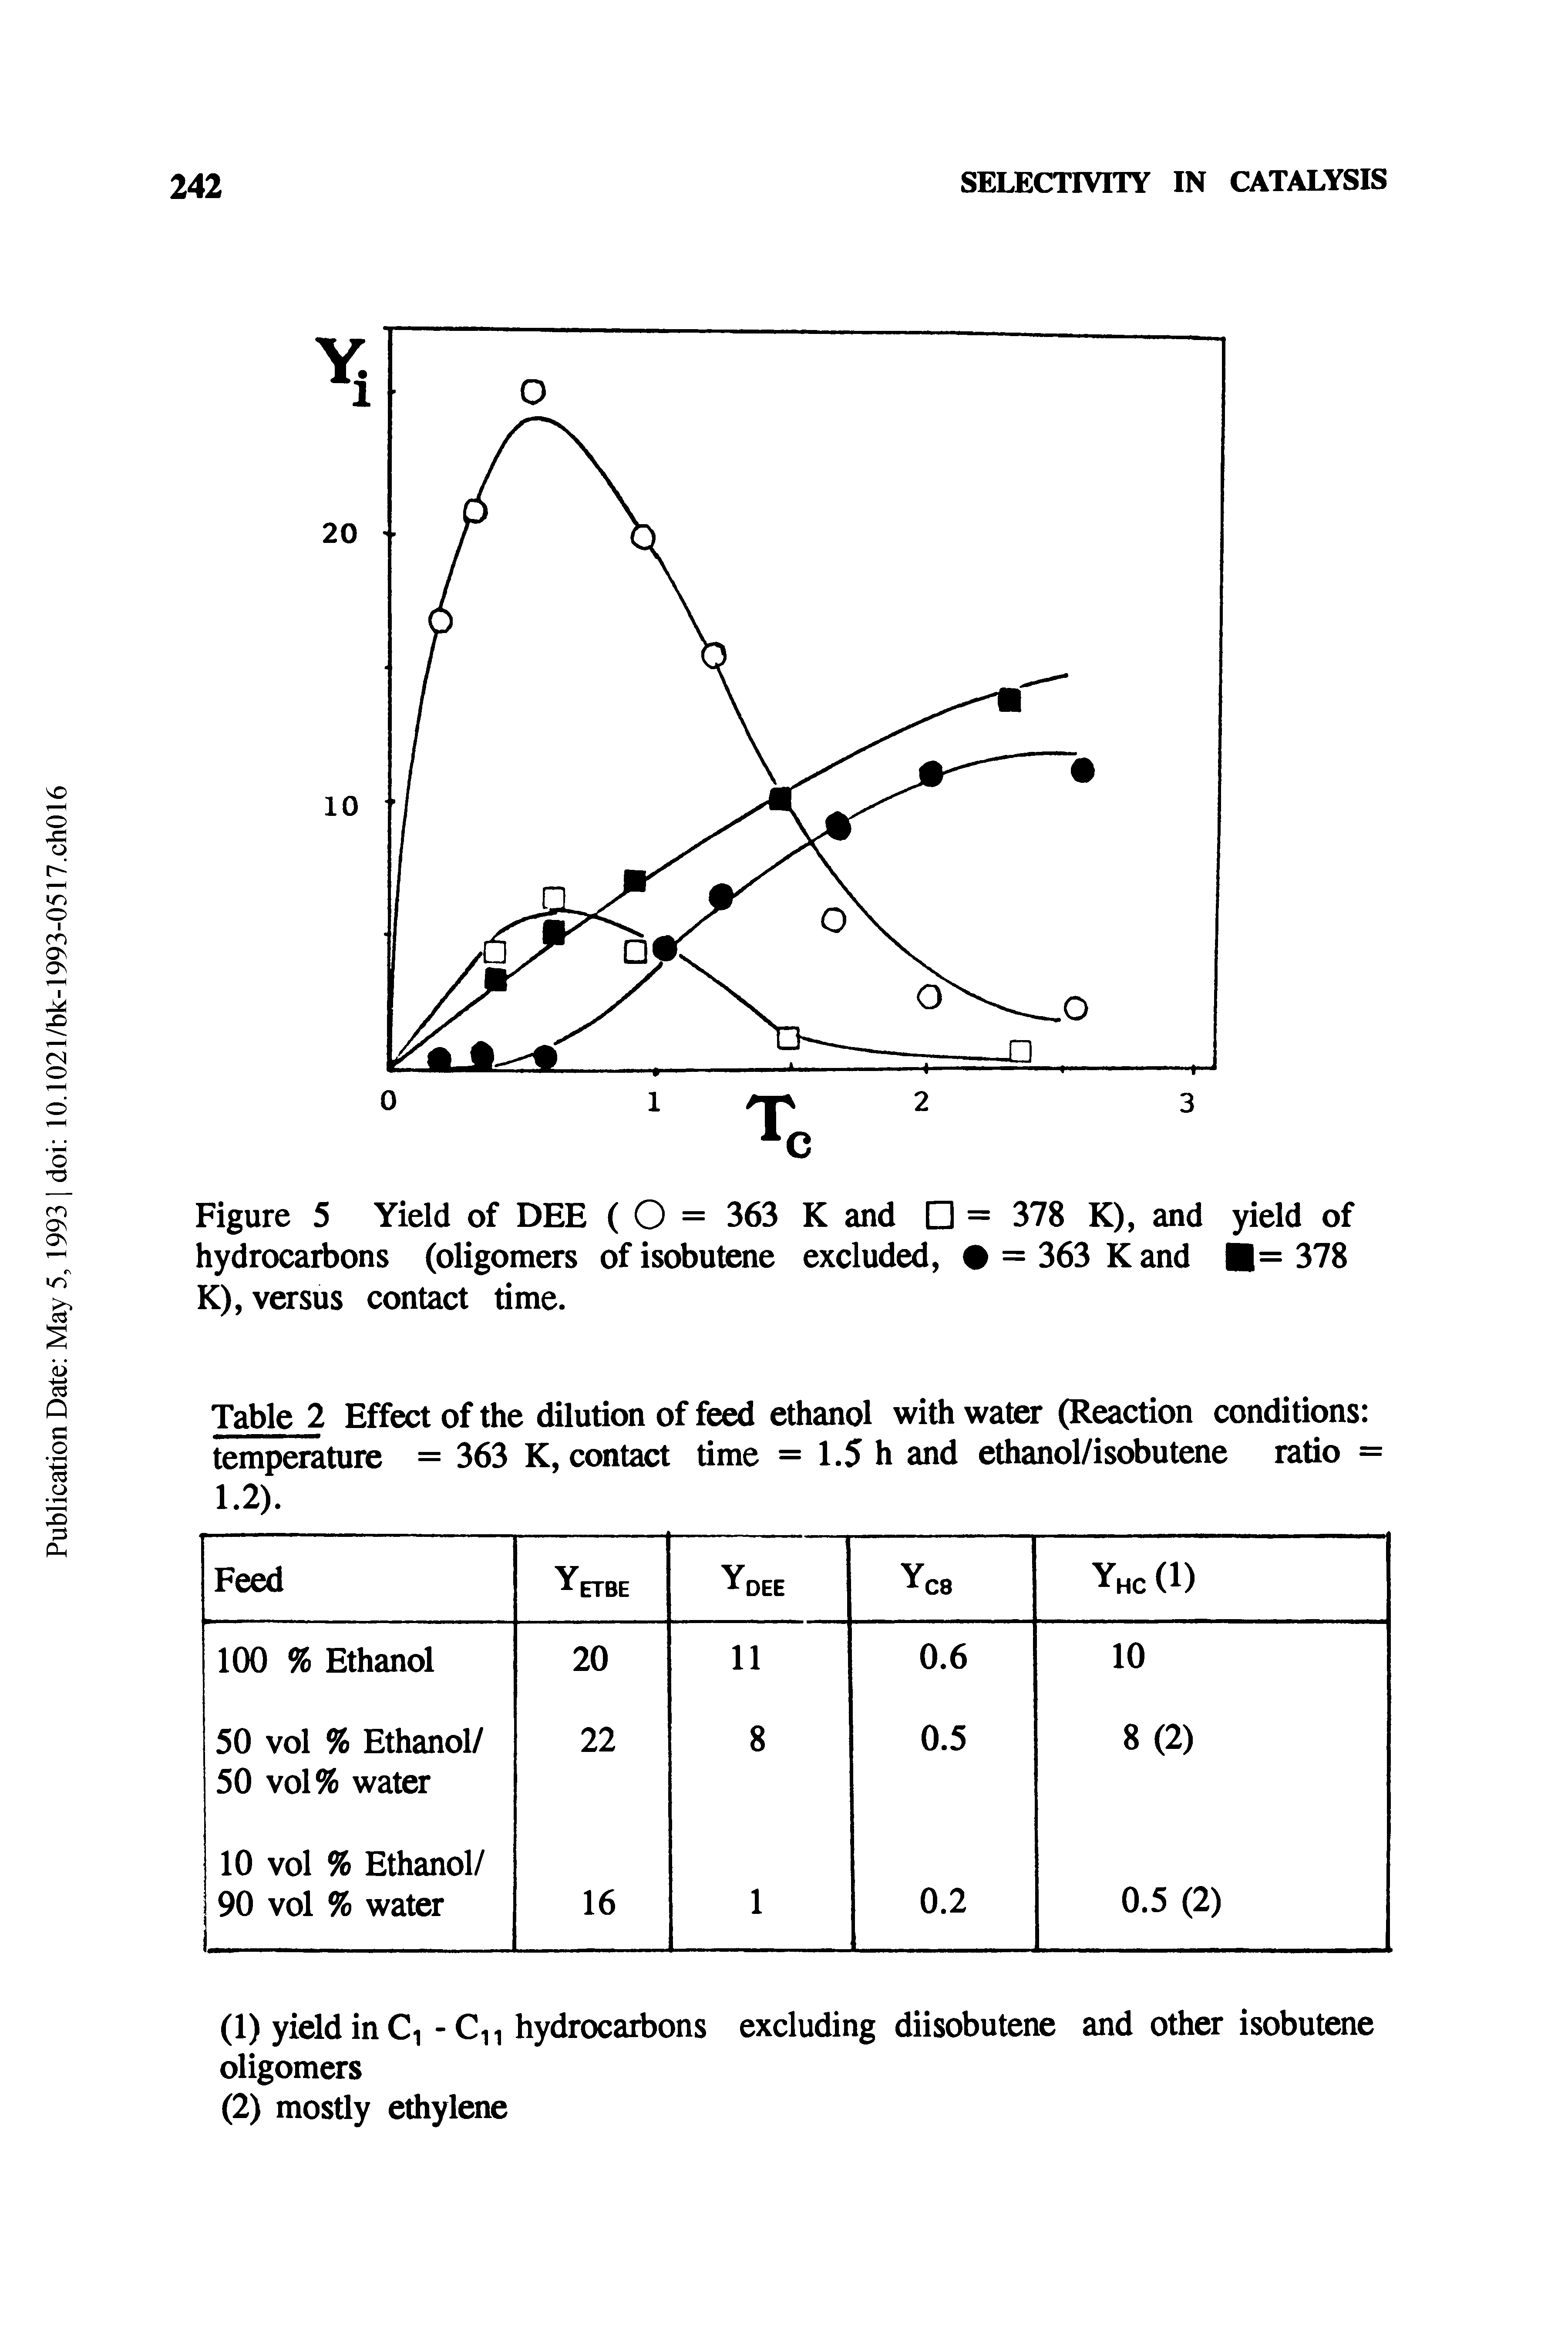 Table 2 Effect of the dilution of feed ethanol with water (Reaction conditions temperature = 363 K, contact time = 1.5 h and ethanol/isobutene ratio = 1.2).